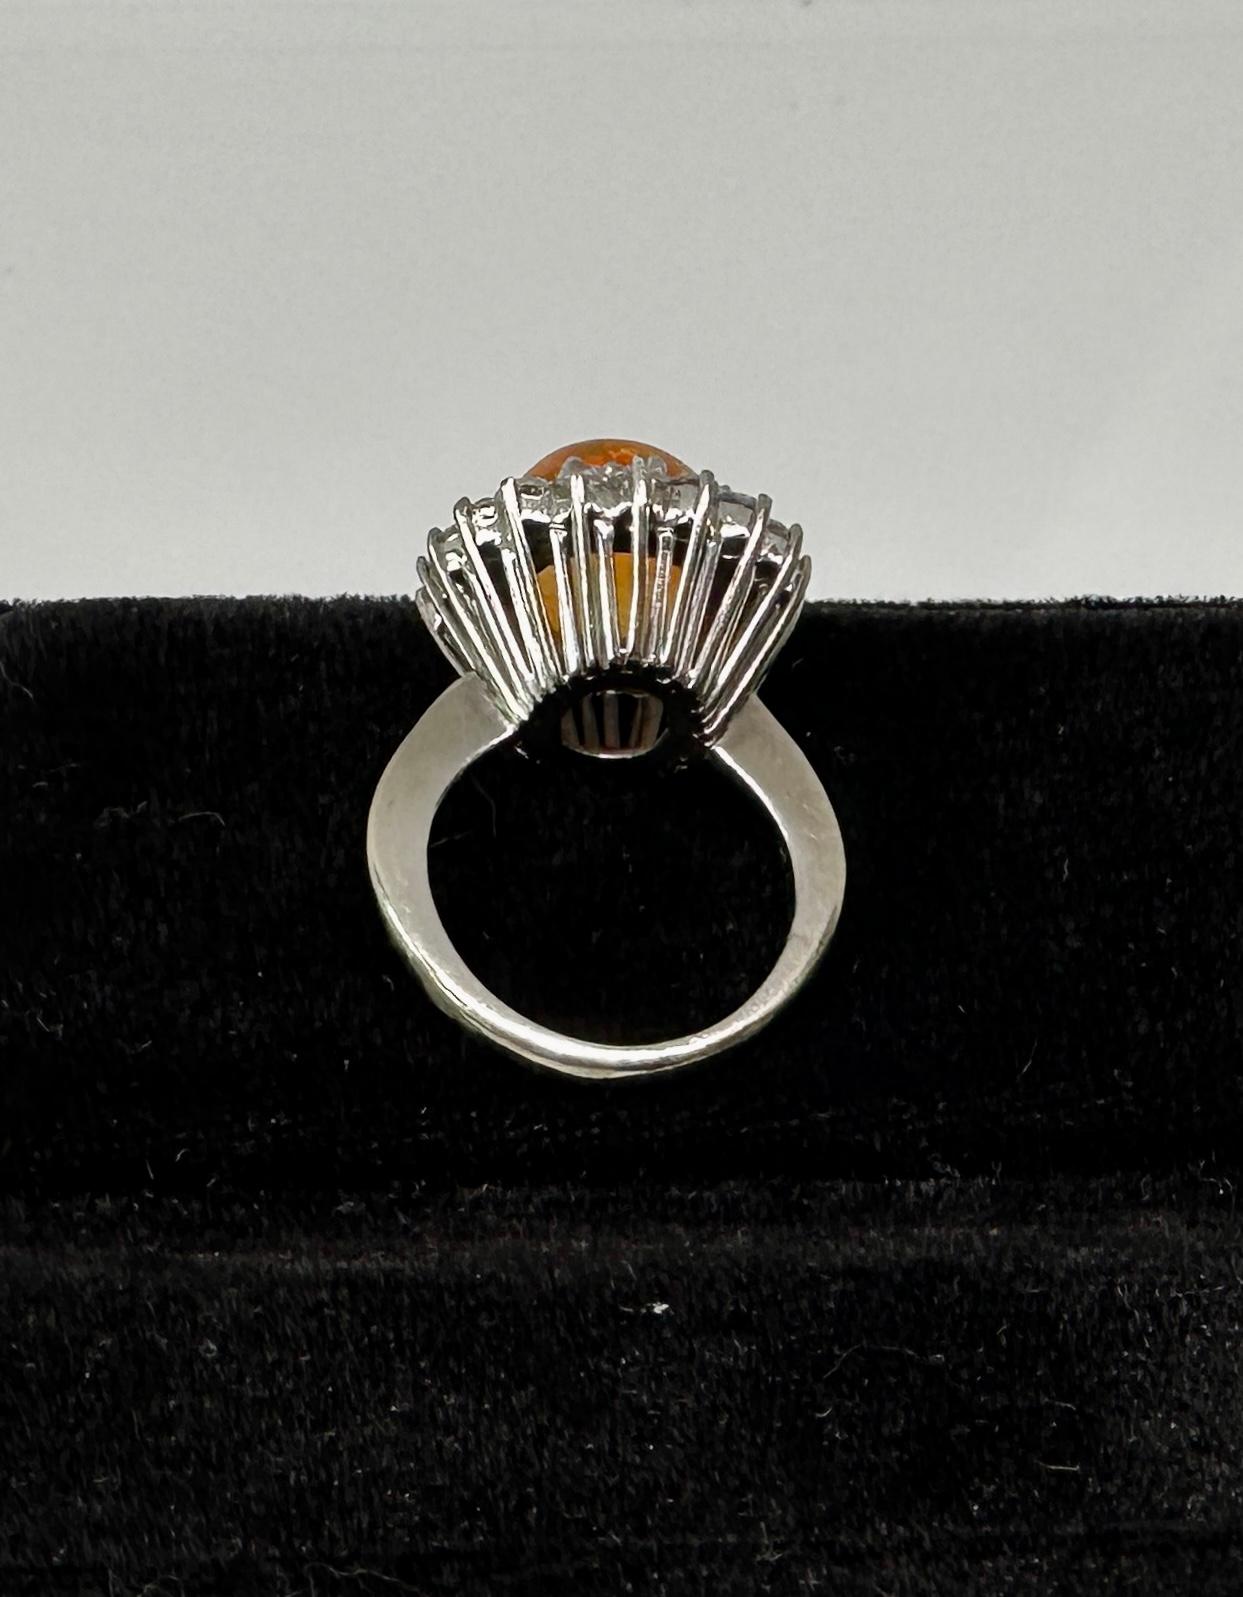 6 Carat Mexican Fire Opal Diamond Halo Ring 14 Karat Gold Antique Cocktail Ring For Sale 6